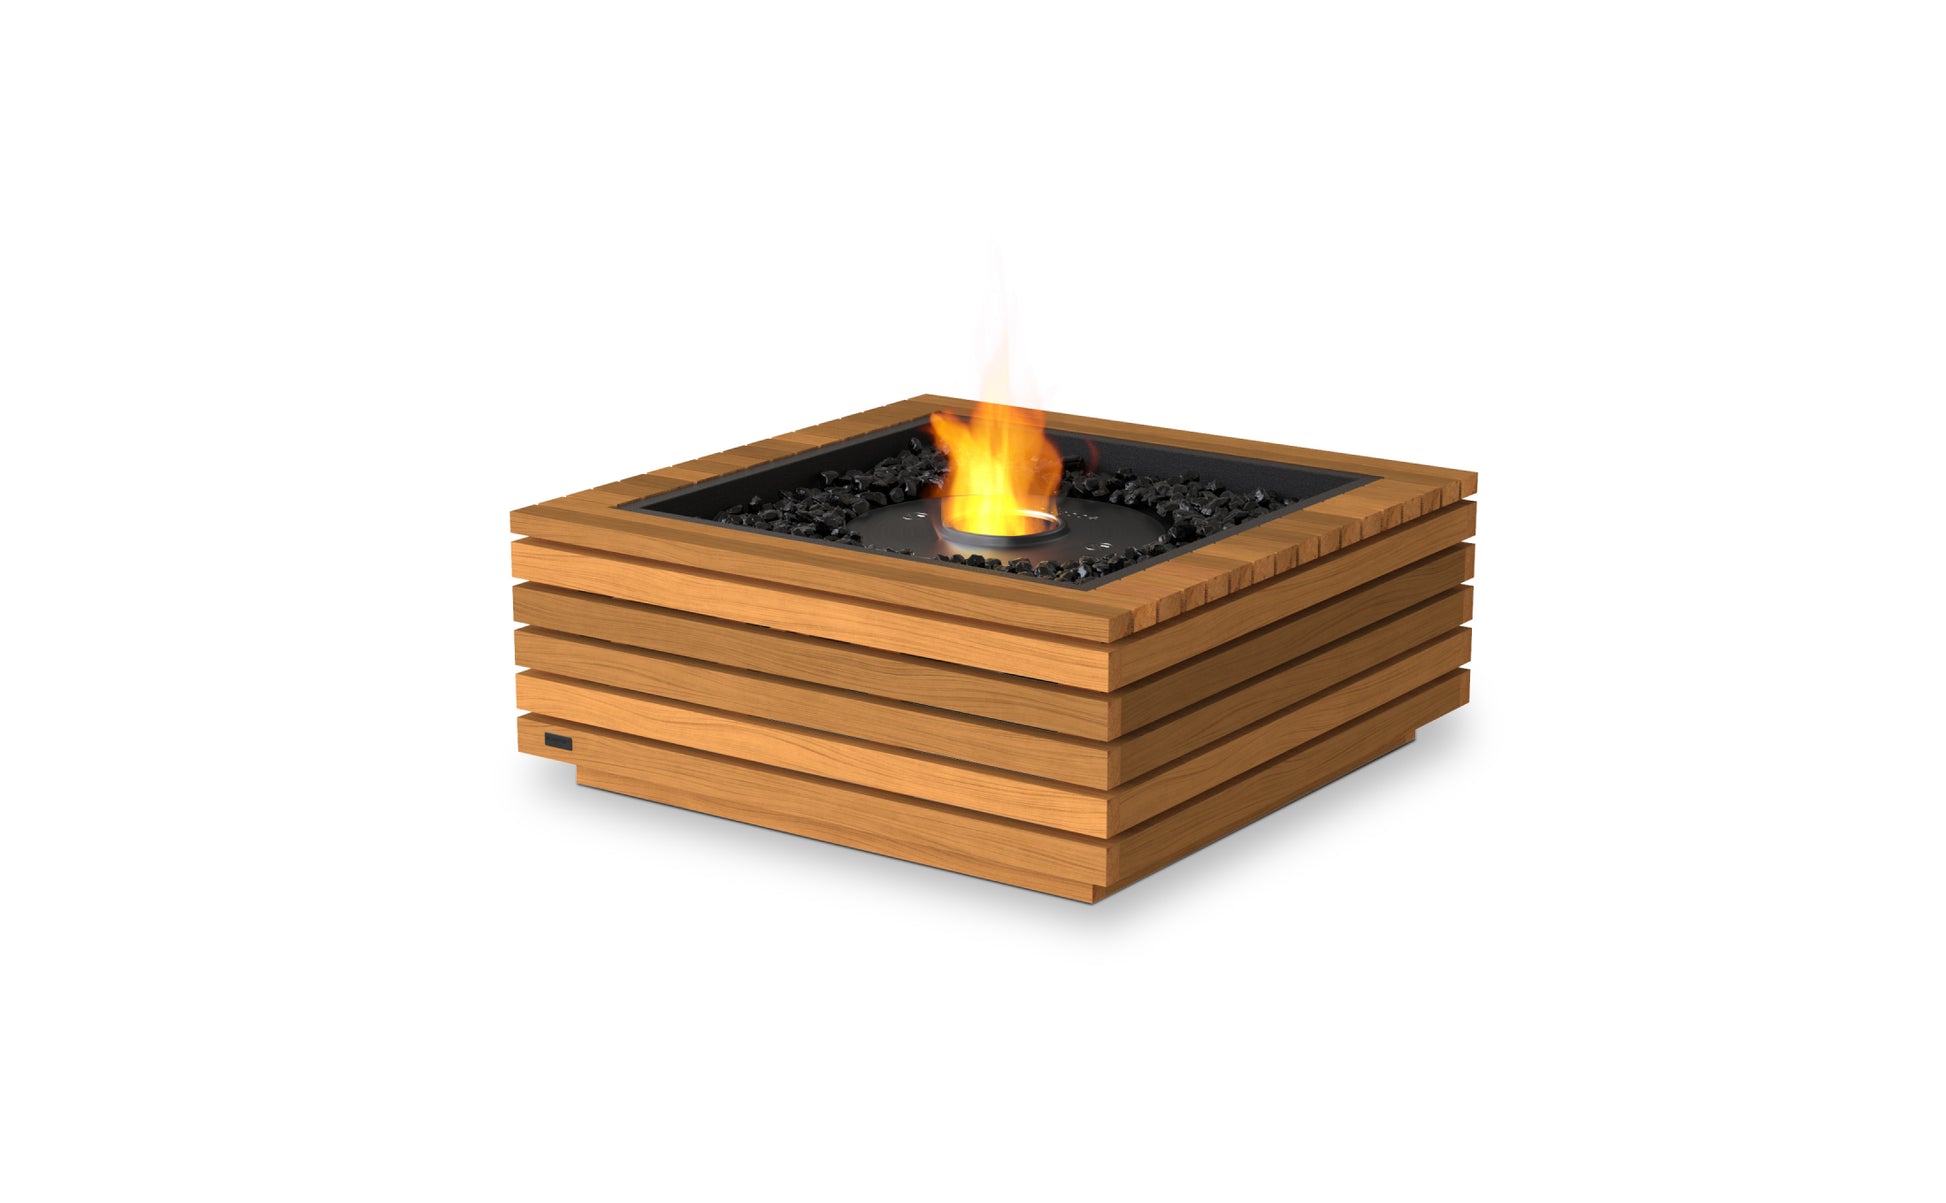 EcoSmart Fire Base 30 Fire Pit Table with Bioethanol Sustainable Fuel - PadioLiving - EcoSmart Fire Base 30 Fire Pit Table with Bioethanol Sustainable Fuel - Fire Pit - PadioLiving